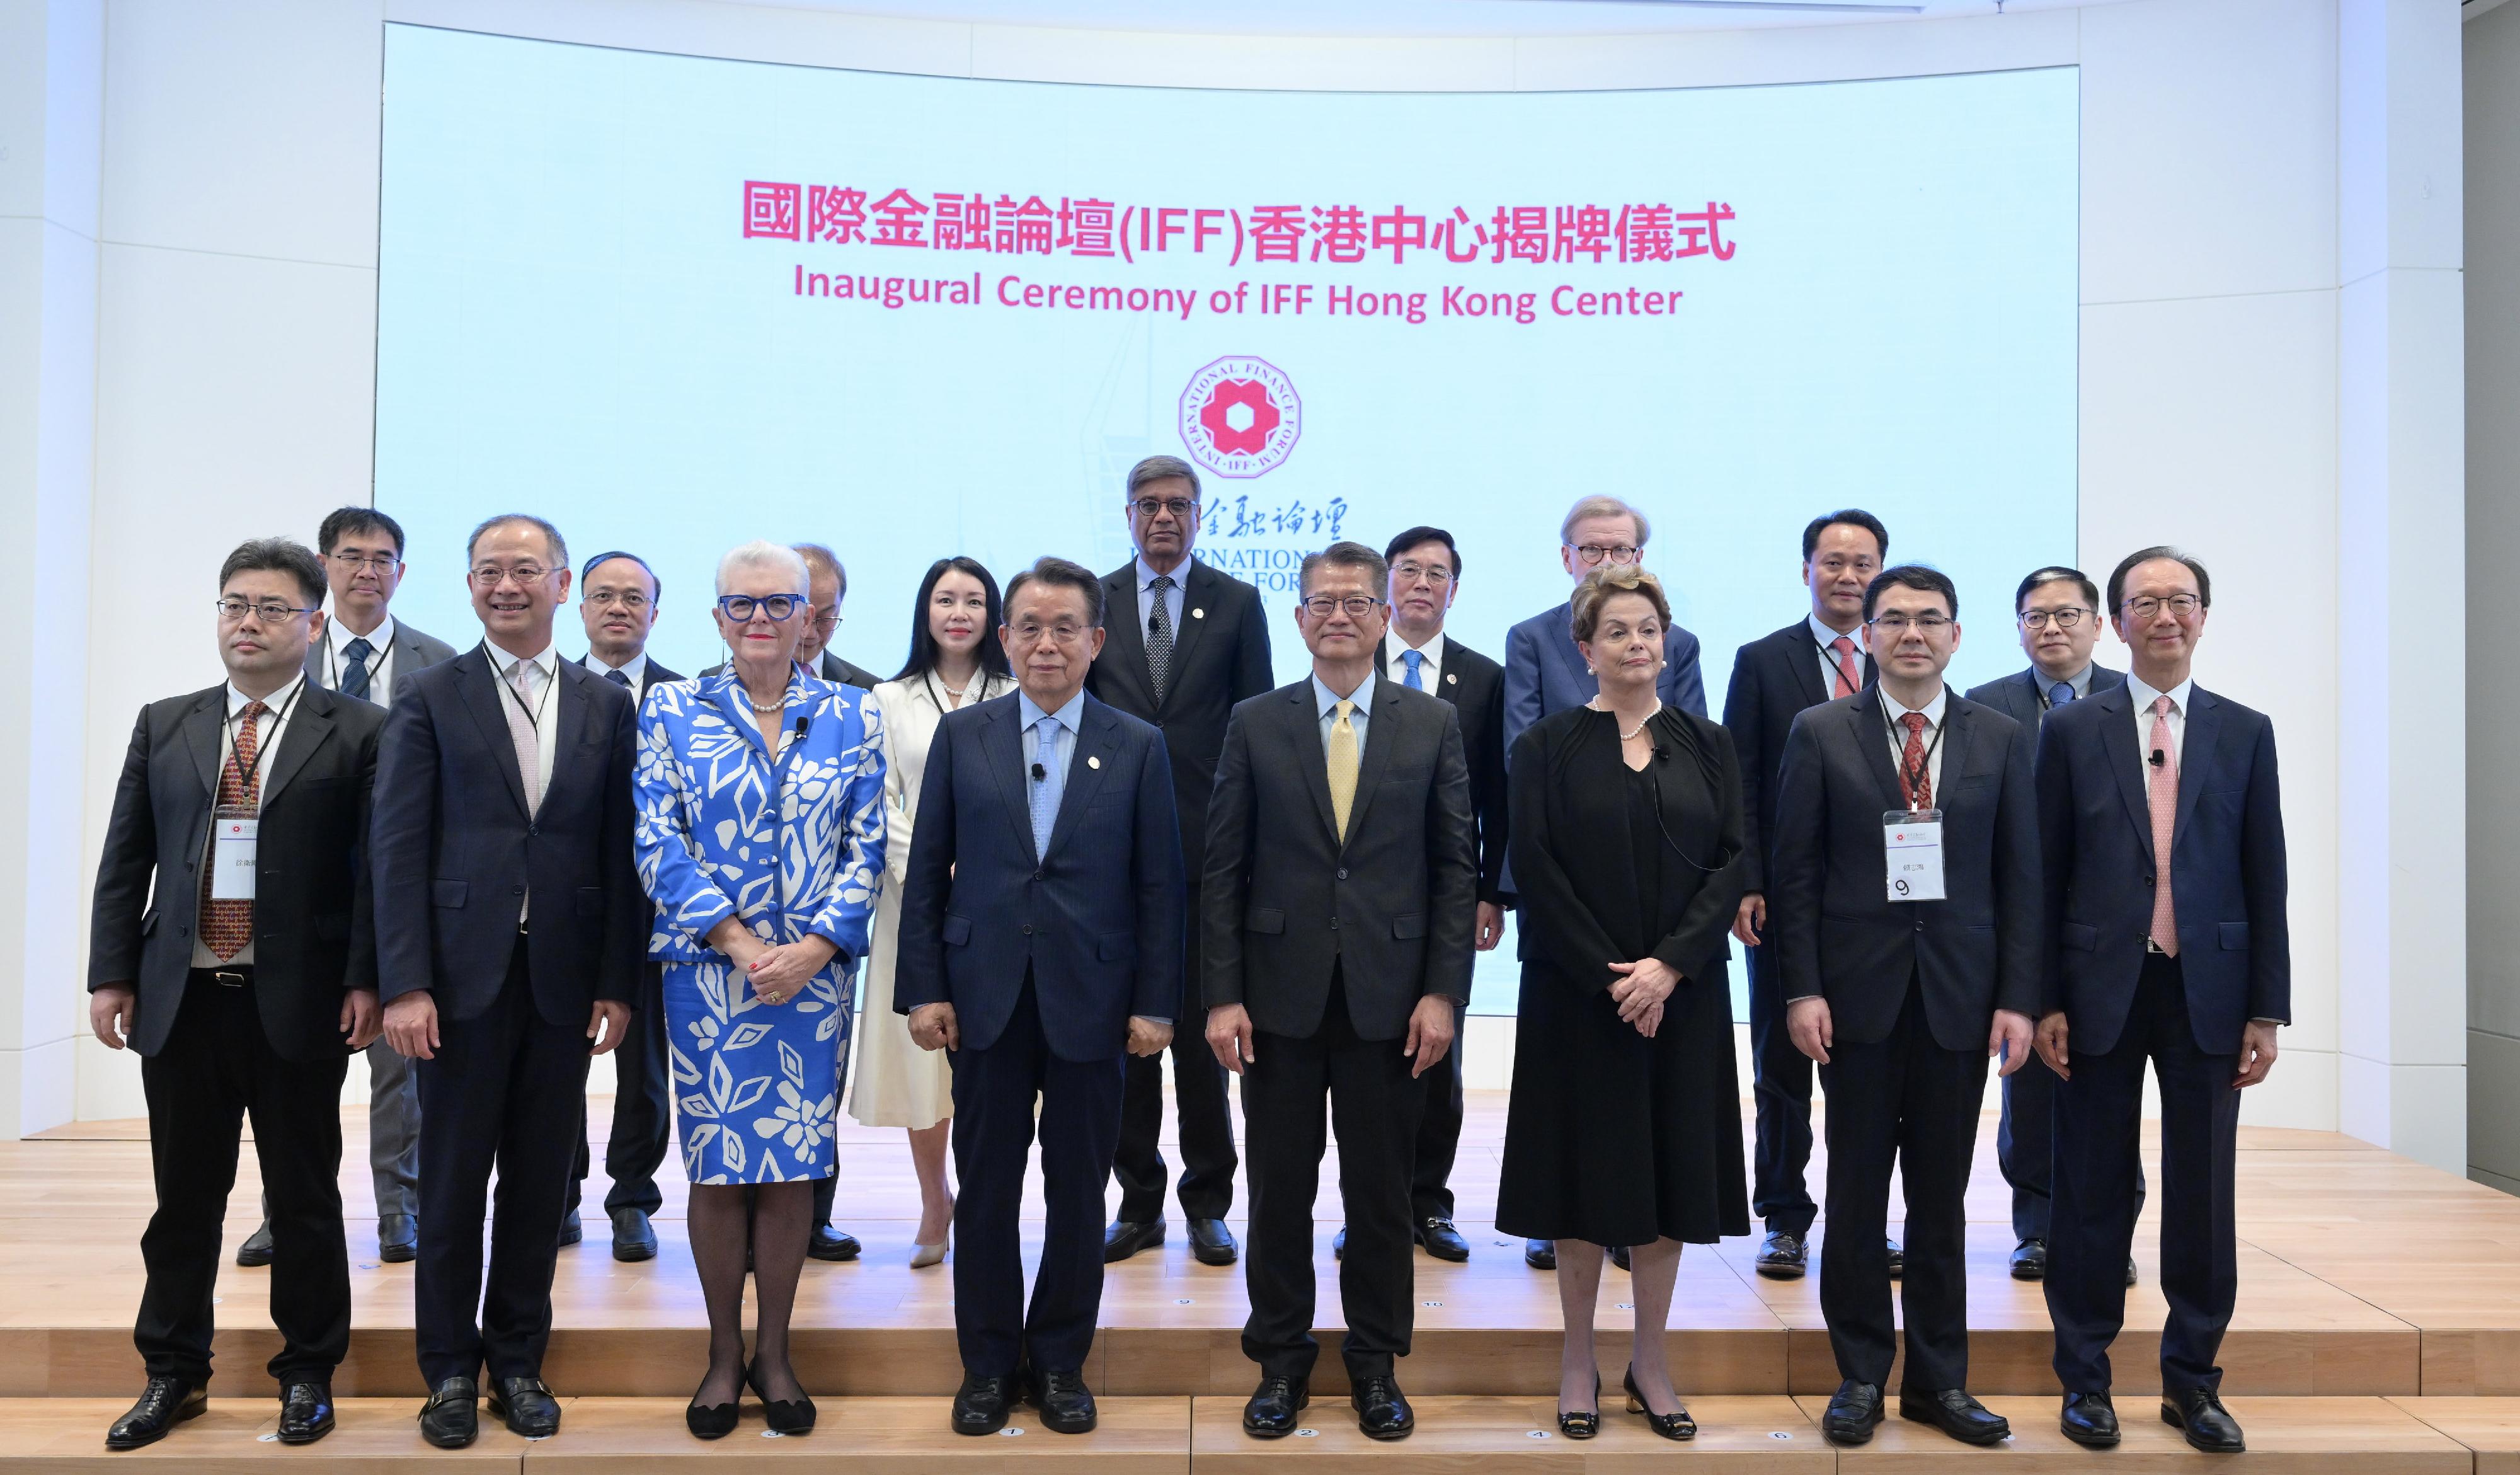 The Financial Secretary, Mr Paul Chan, attended the International Finance Forum (IFF) Hong Kong Conference cum Inaugural Ceremony of IFF Hong Kong Center today (May 5). Photo shows (front row, from second left) the Chief Executive of the Hong Kong Monetary Authority, Mr Eddie Yue; the Chairperson of the IFF Sustainable Development Committee, Ms Jenny Shipley; Co-Chairman of the IFF Dr Han Seung-soo; Mr Chan; the President of the New Development Bank, Ms Dilma Rousseff, and other guests at the Inaugural Ceremony of IFF Hong Kong Center.

